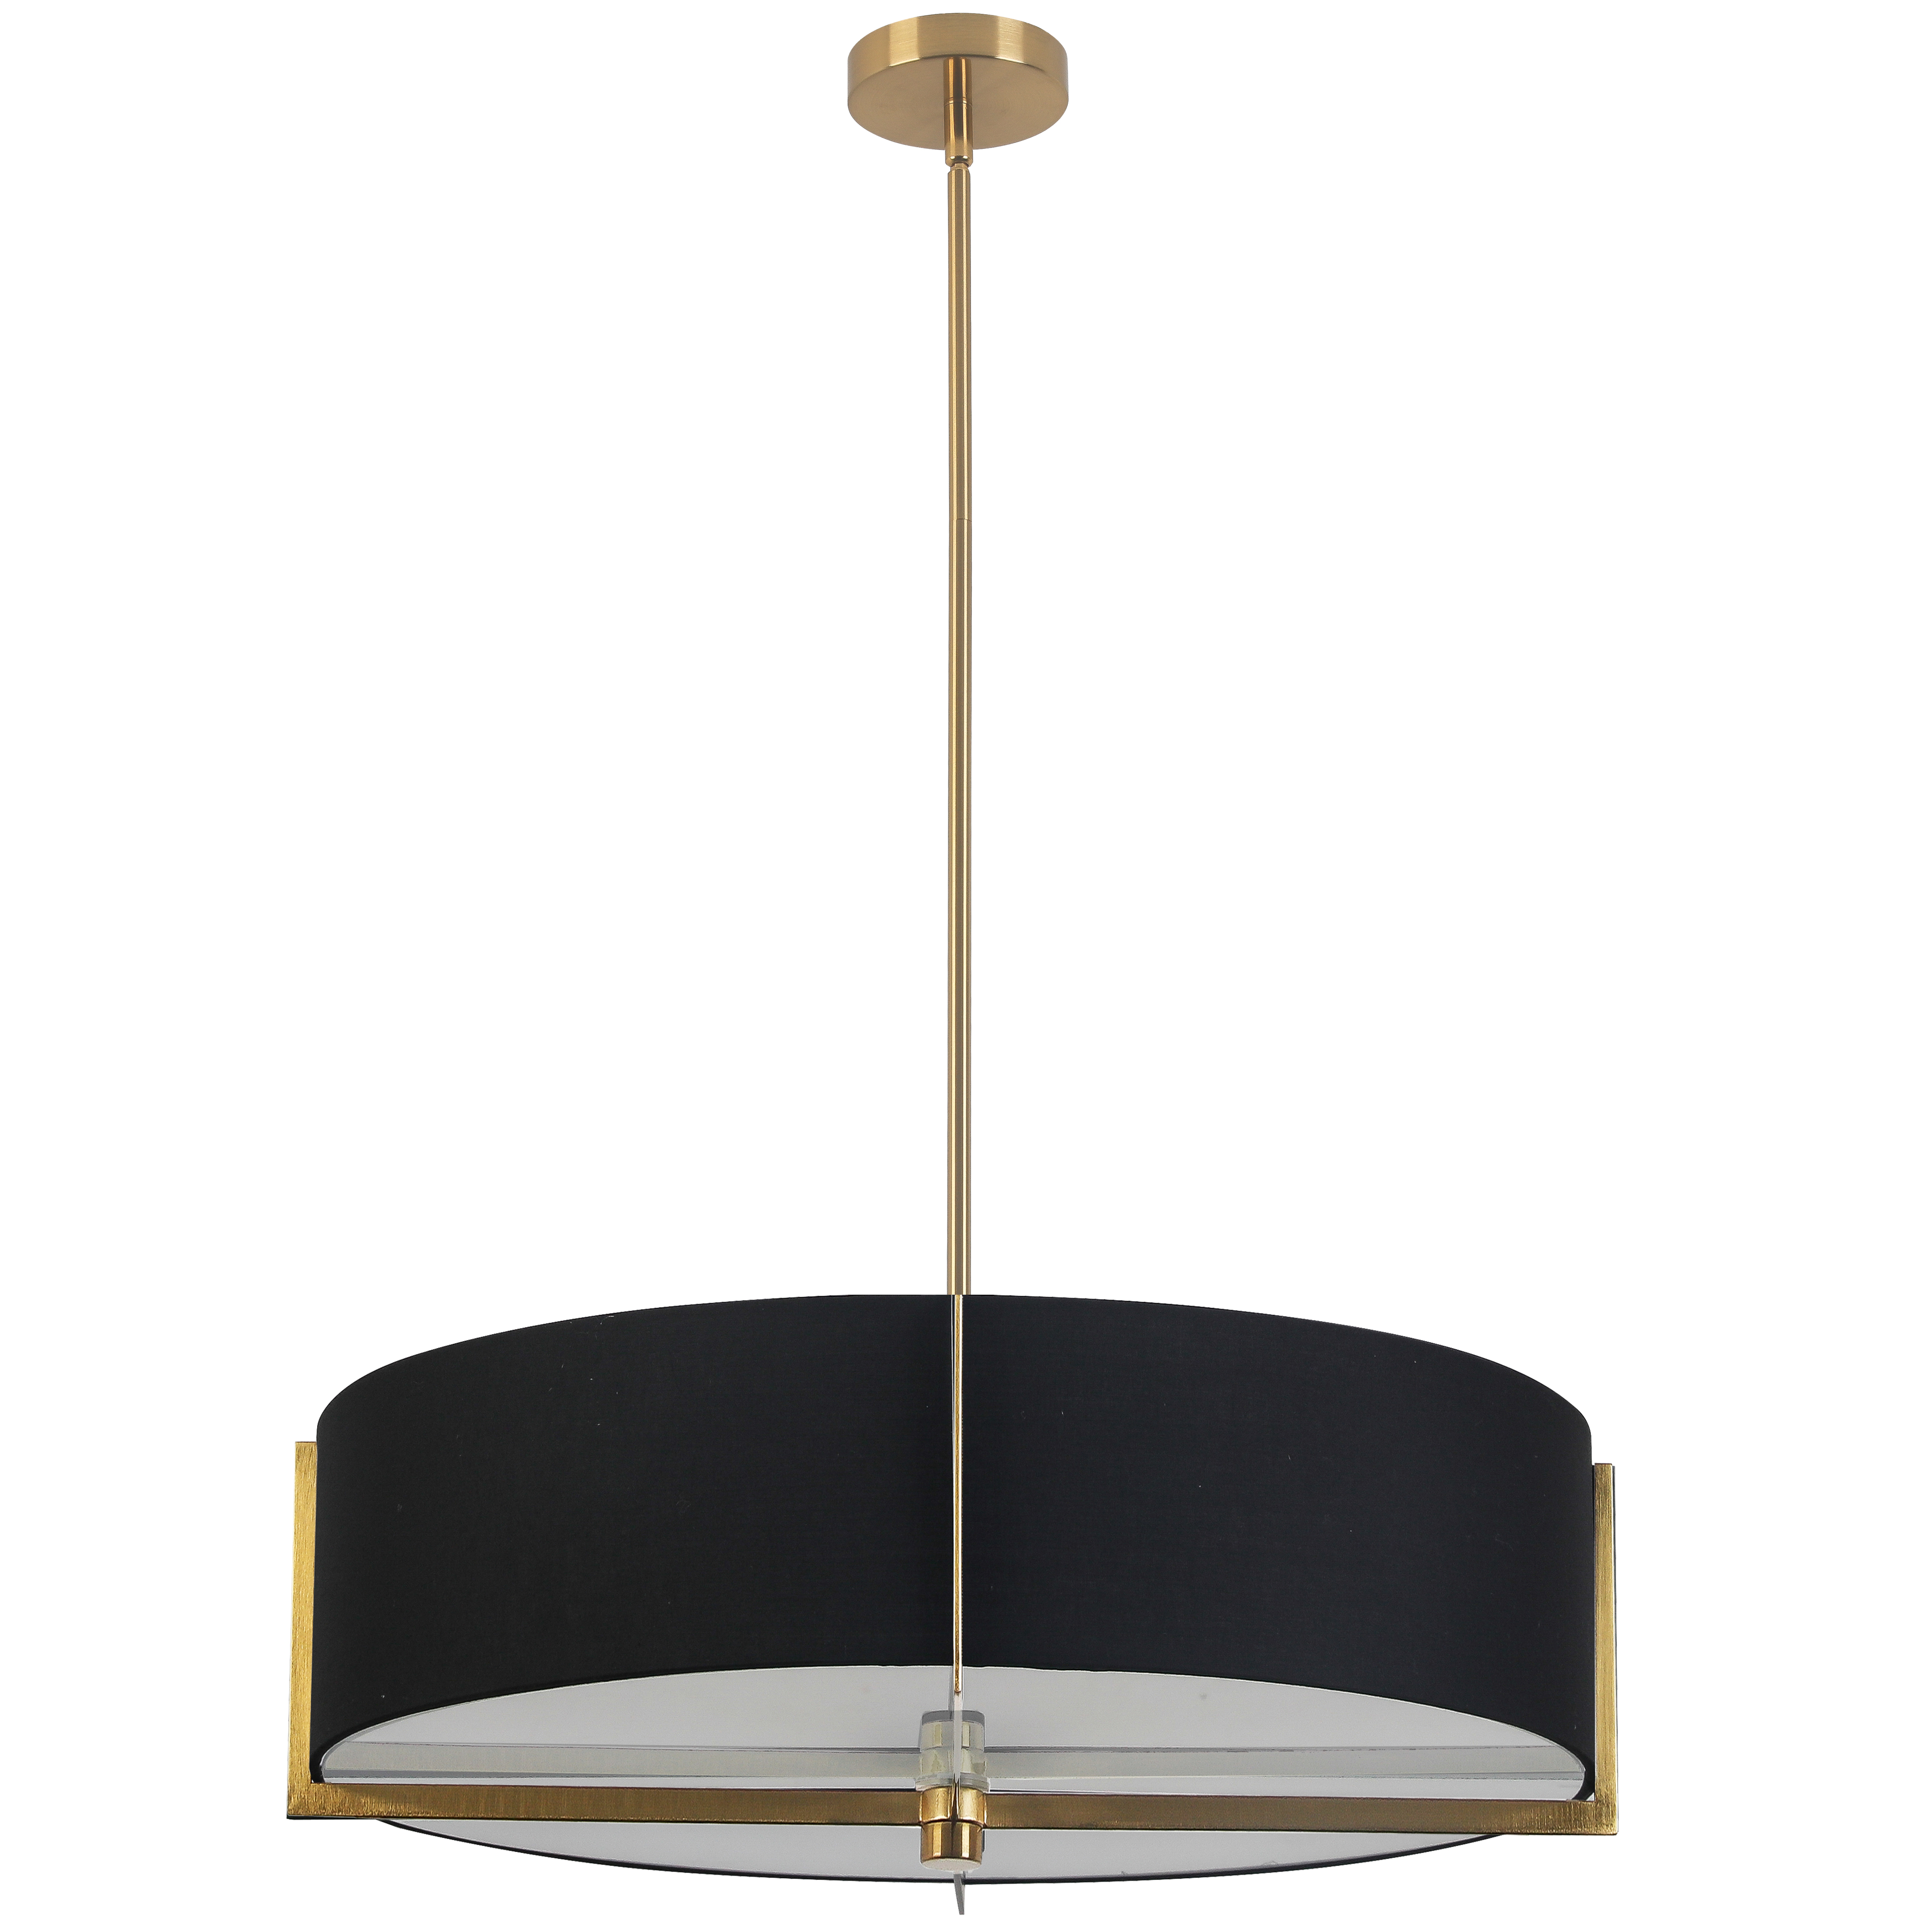 The Preston family of lighting offers a sleek silhouette with contrasting detail that draws the eye. It makes a statement, but blends easily with contemporary, ultra-modern and minimalist décor schemes. The look is based on a fabric drum shade with a relatively narrow profile, available in a choice of fashionable neutrals. The contrasting metal frame holds the shade in place with strong horizontal and vertical lines, while a glass diffuser creates ambient lighting. With its pared down design, Preston lighting has a versatile appeal that will suit many areas of the home from living and dining rooms to kitchen, bedroom and hallways, or an office setting.